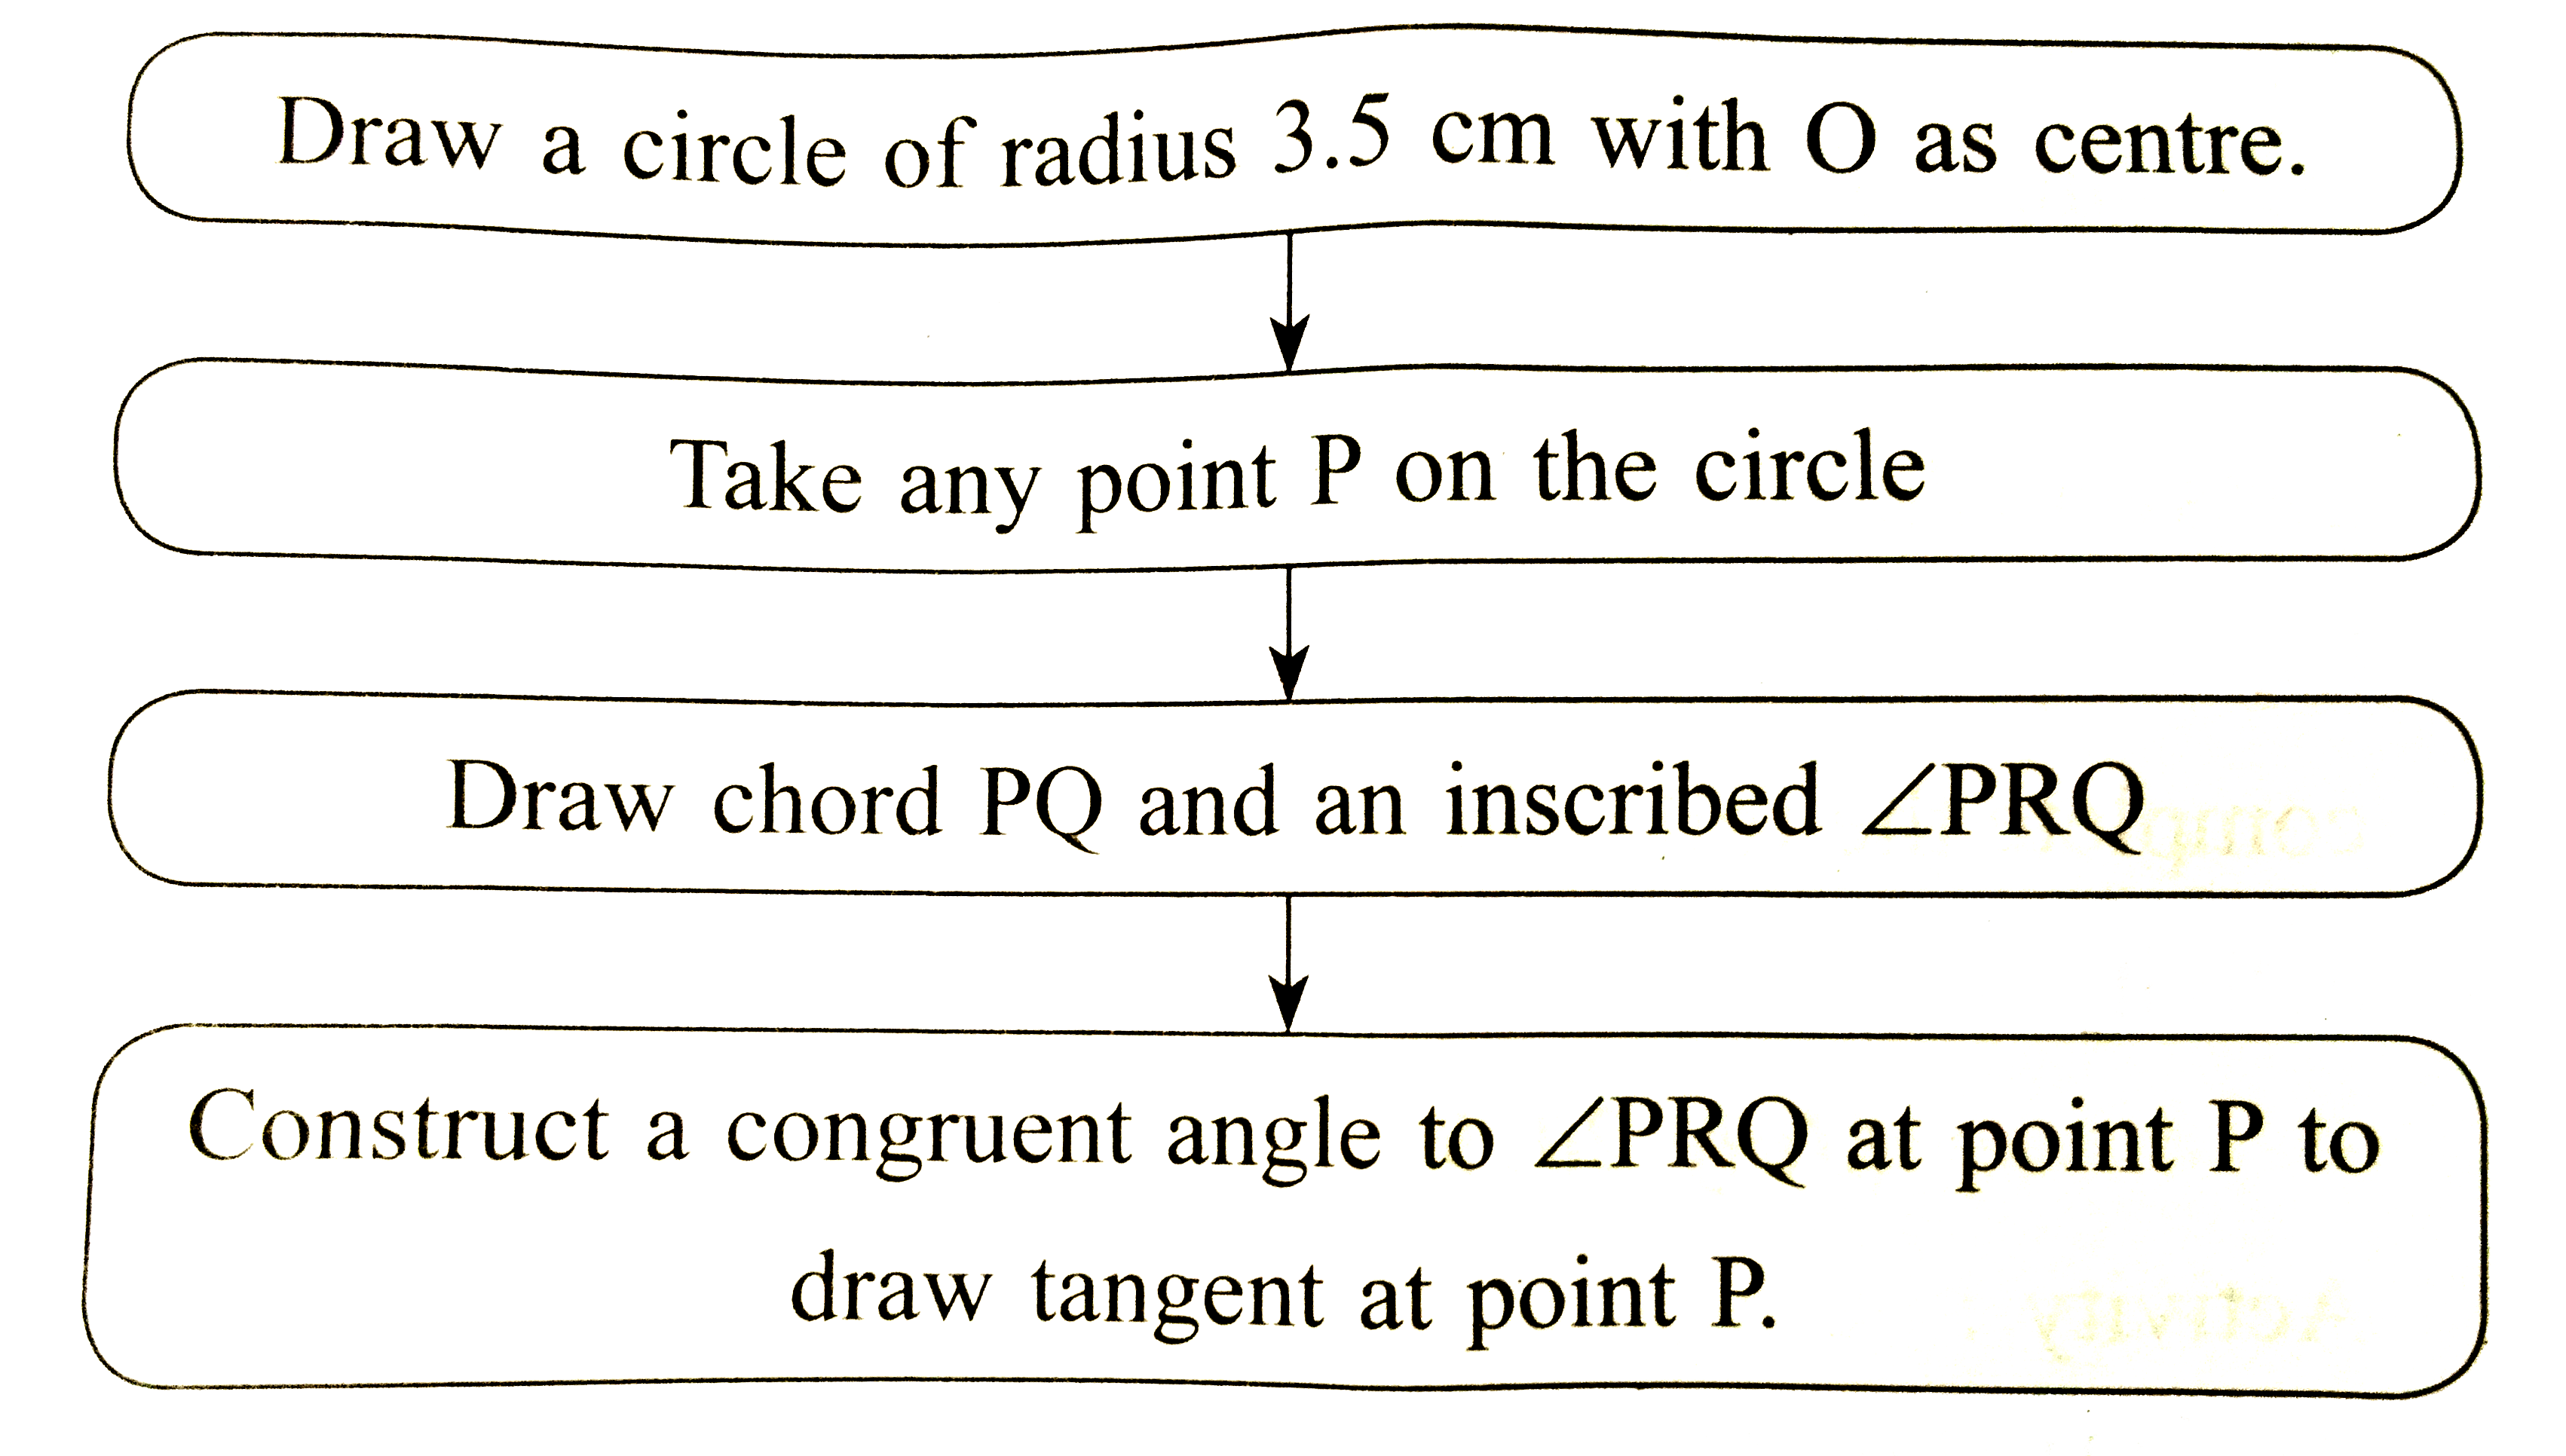 complete the following activity to draw a tangent at a point on the circle.